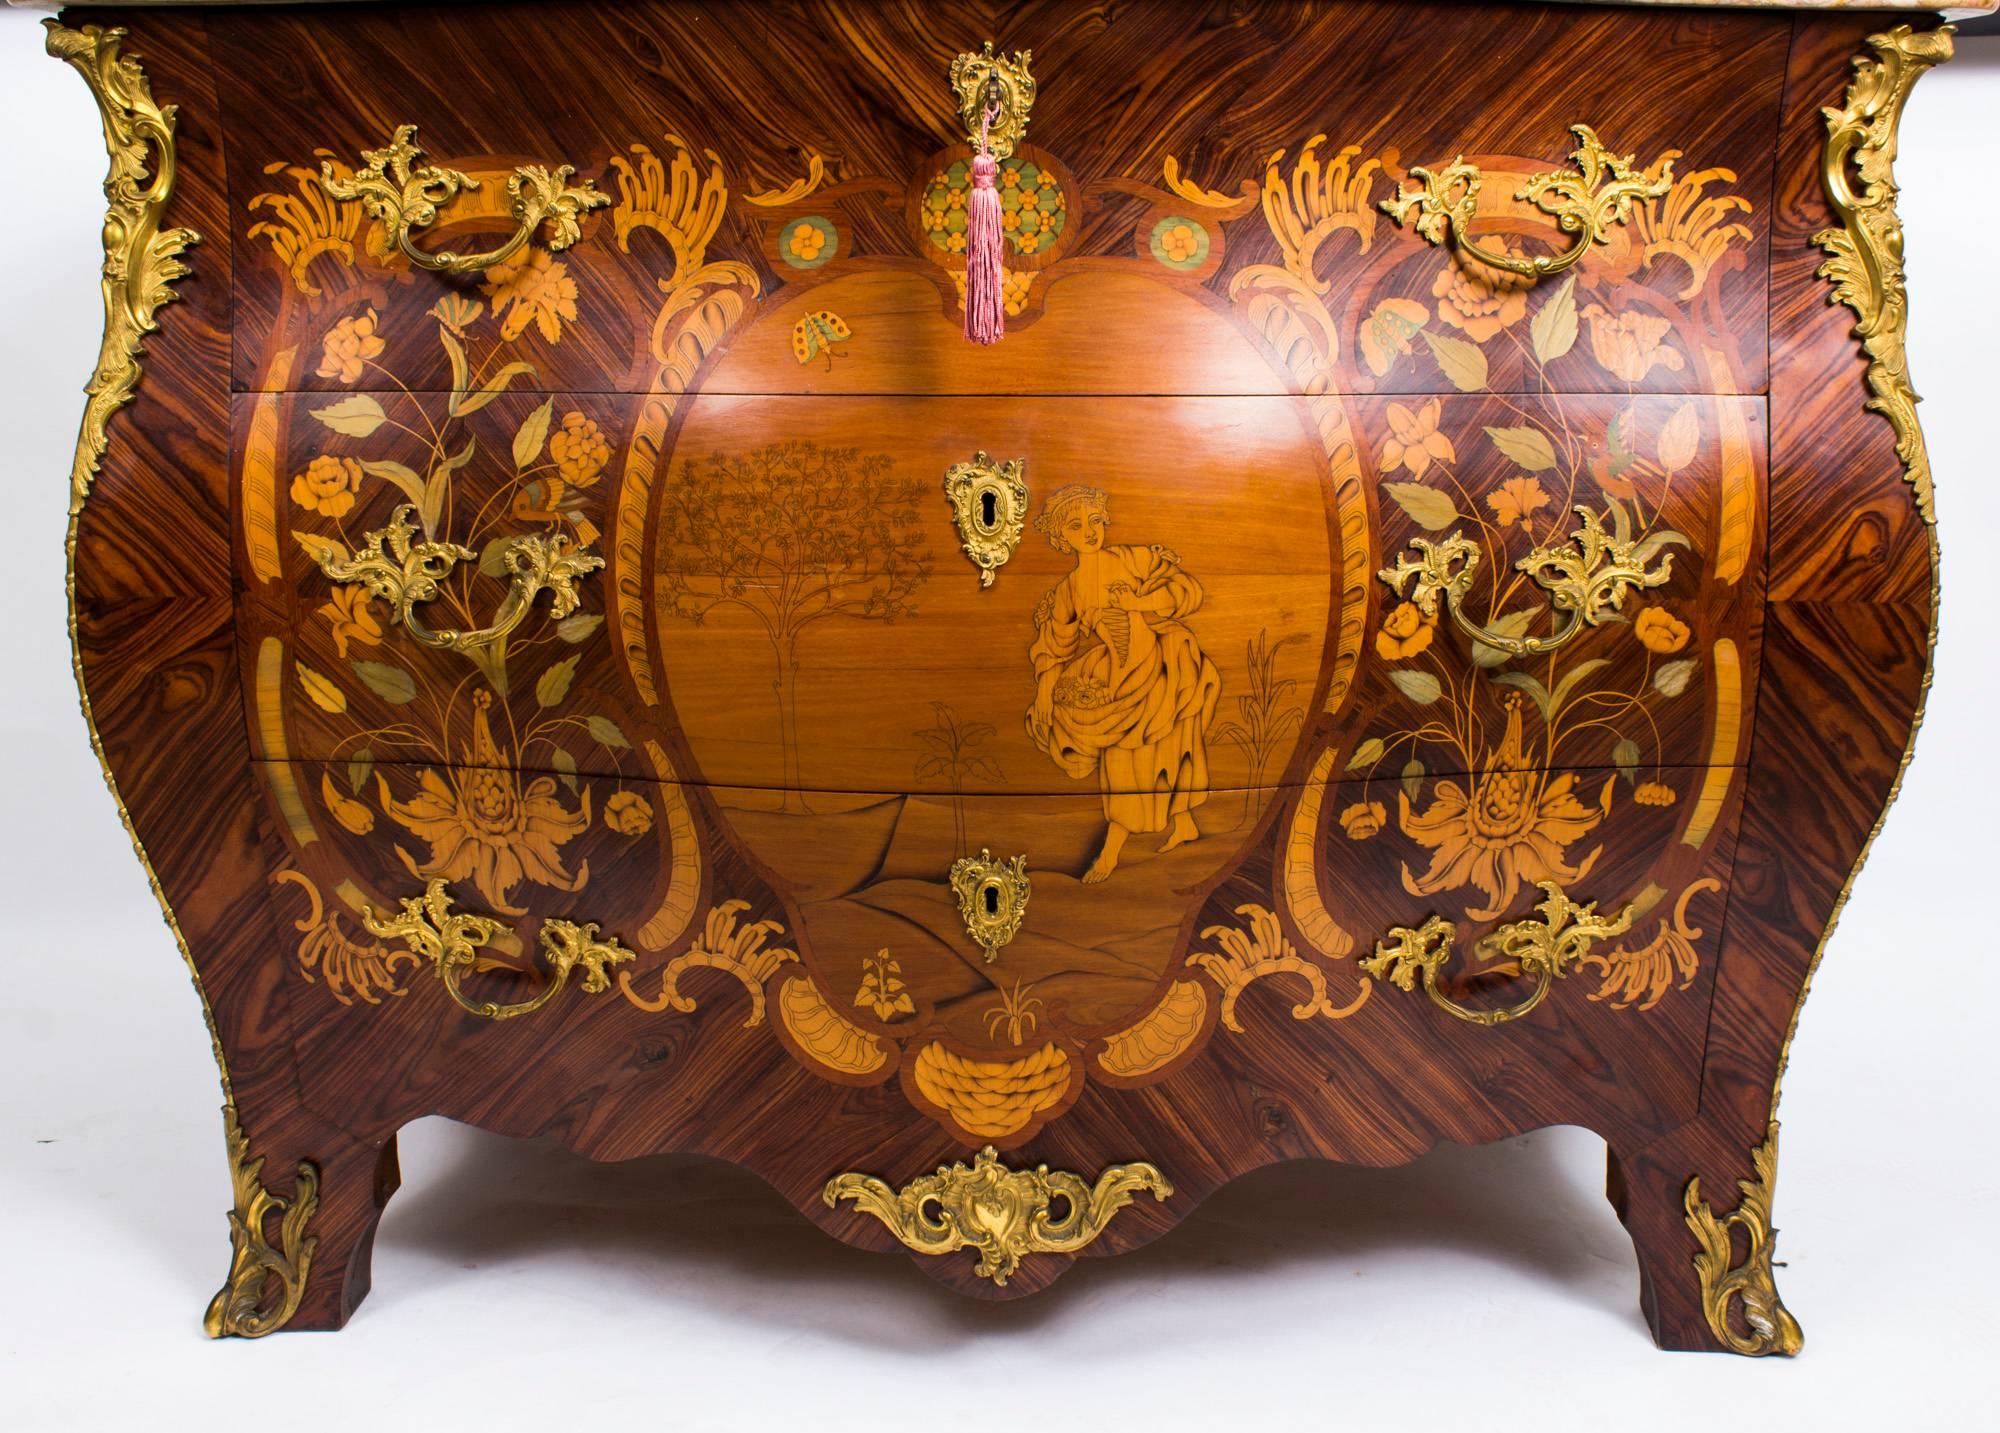 This is a beautiful antique French Goncalo Alves, satinwood and tulipwood marquetry inlaid commode, circa 1830 in date. 

This gorgeous commode has three capacious drawers for ample storage, and was inspired by the Louis XV Revival. Elaborately